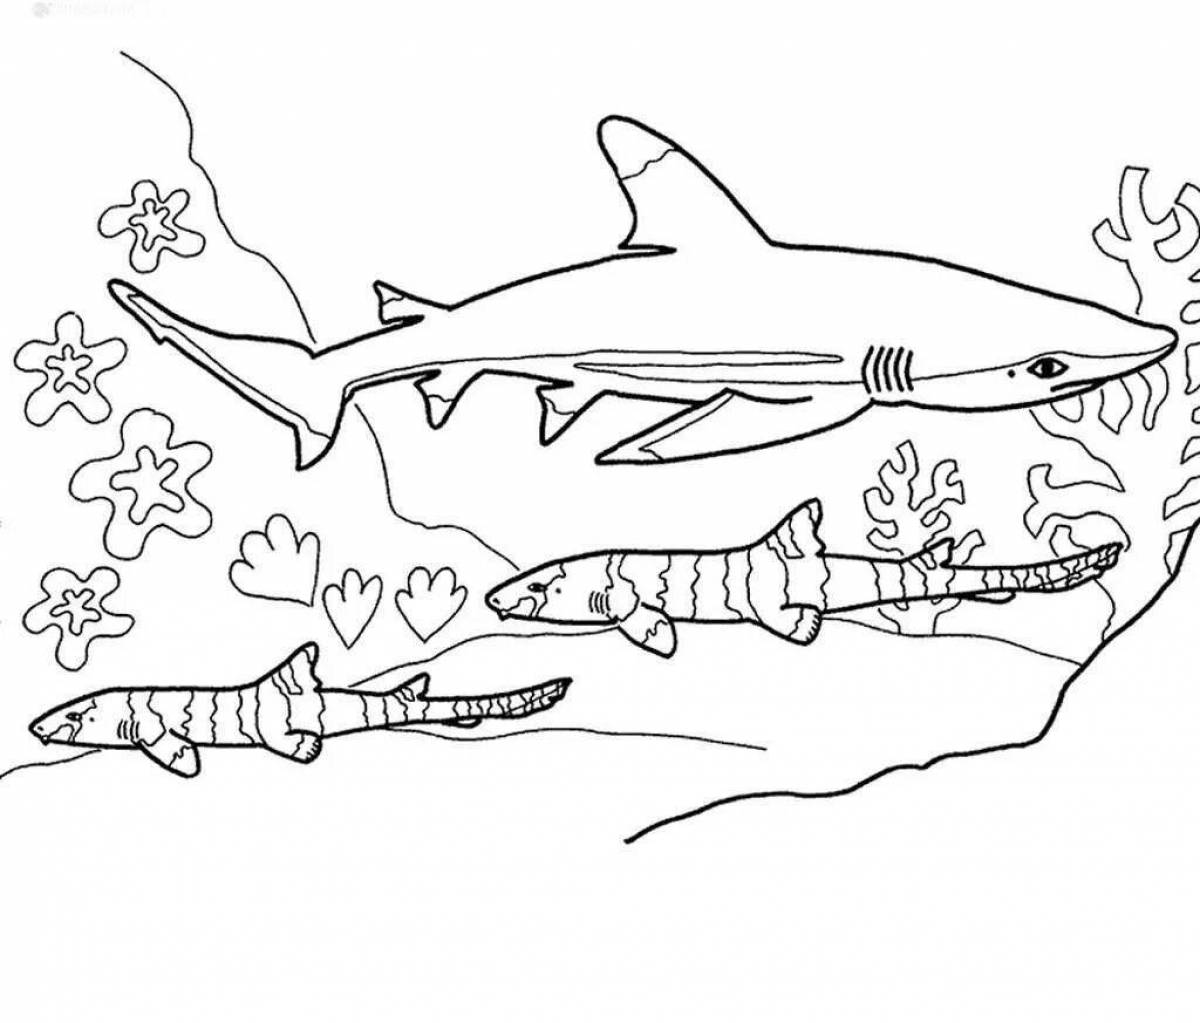 Shark coloring book for 4-5 year olds